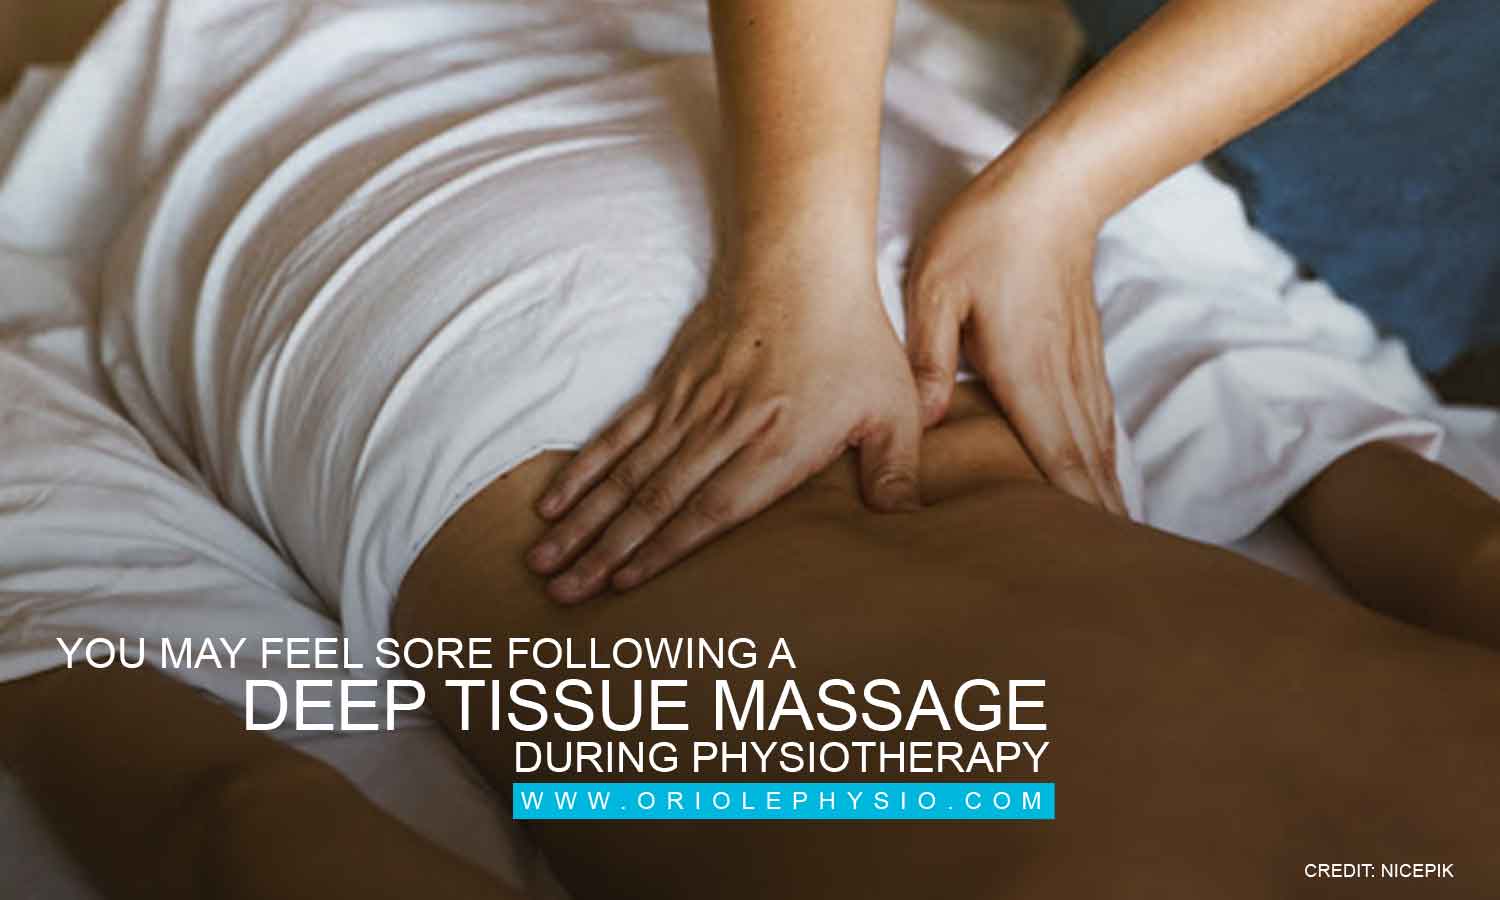 You may feel sore following a deep tissue massage during physiotherapy